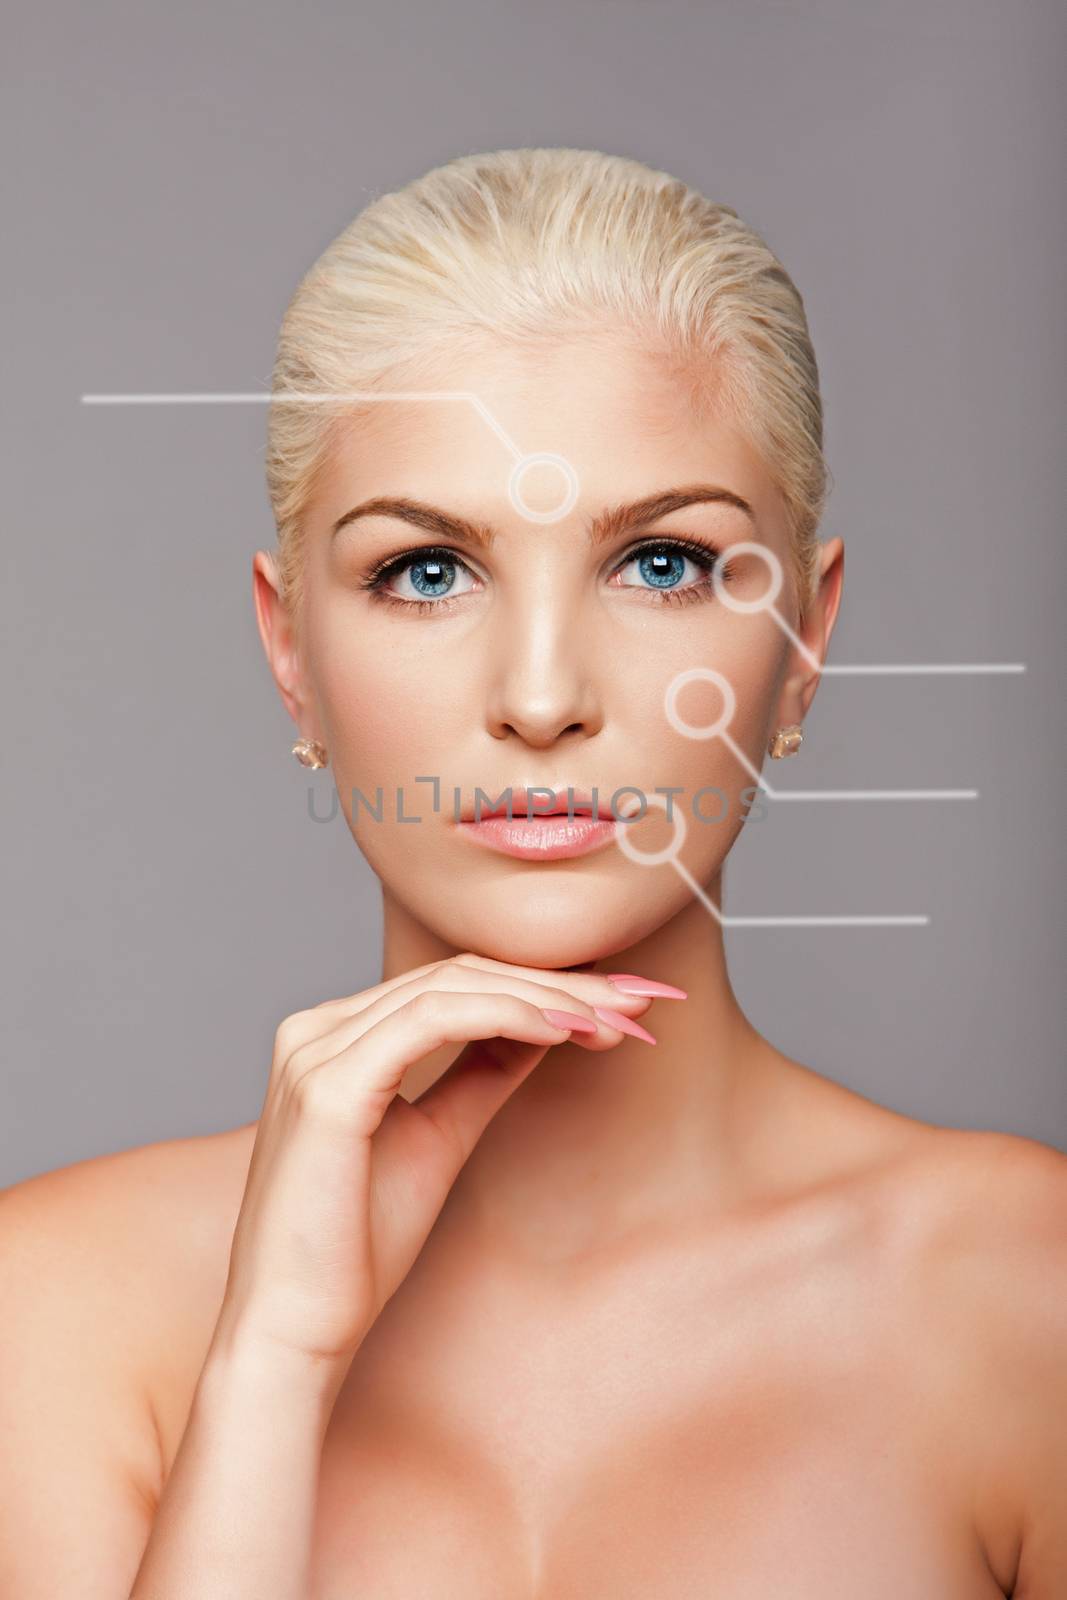 Beauty portrait face of beautiful blond woman with blue eyes and smooth skin with lines identifying wrinkle zones, aesthetics skincare concept.